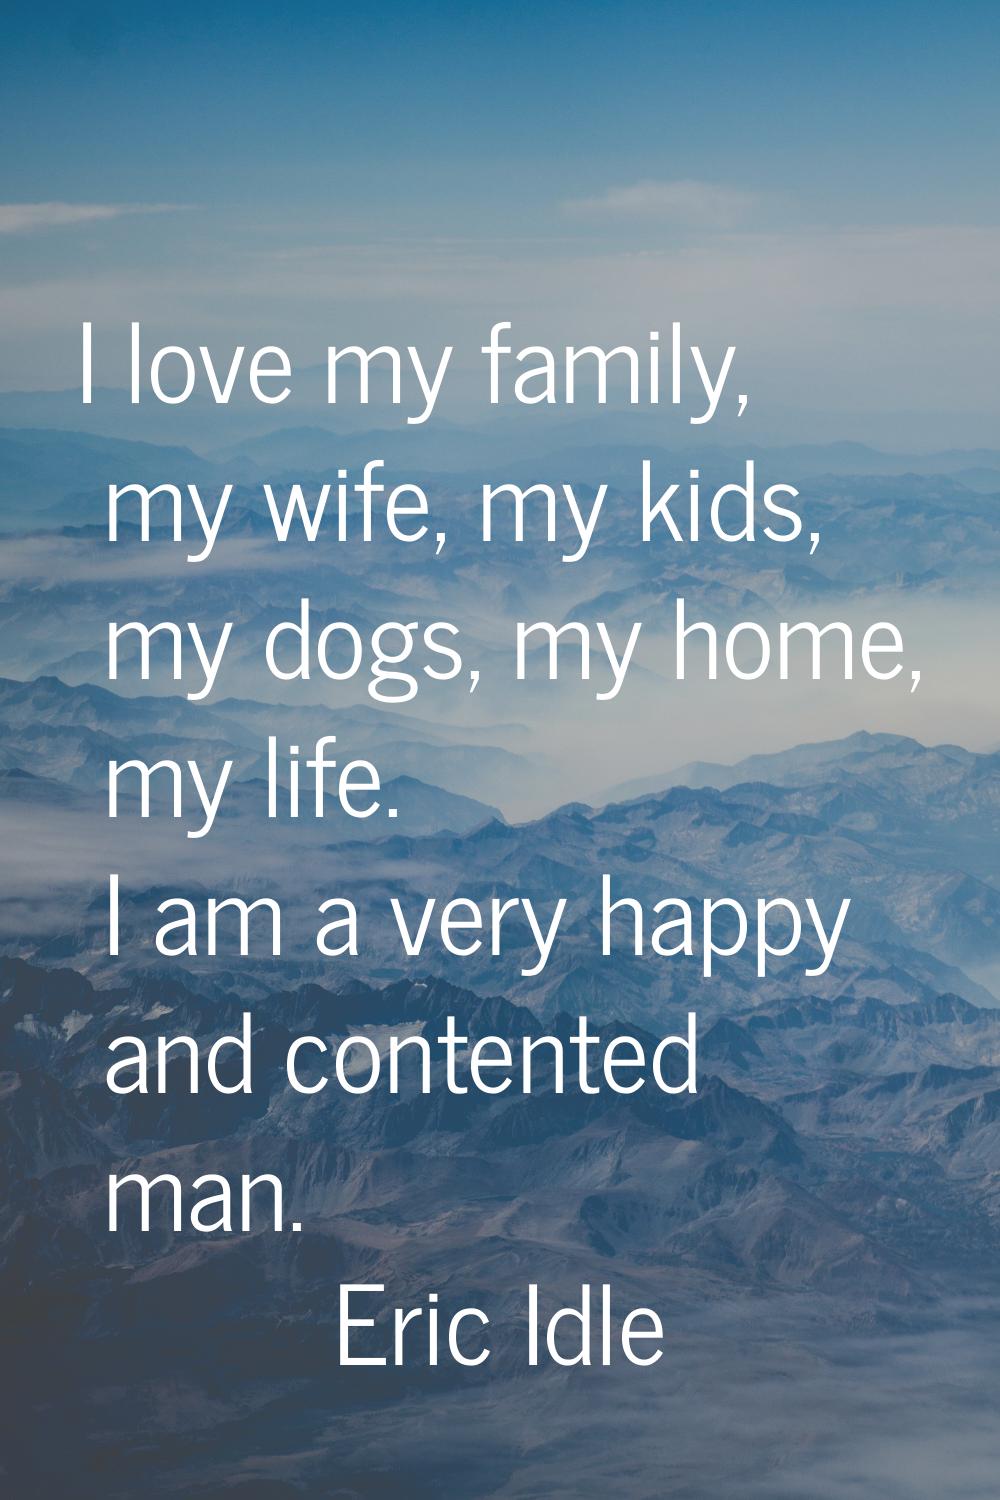 I love my family, my wife, my kids, my dogs, my home, my life. I am a very happy and contented man.